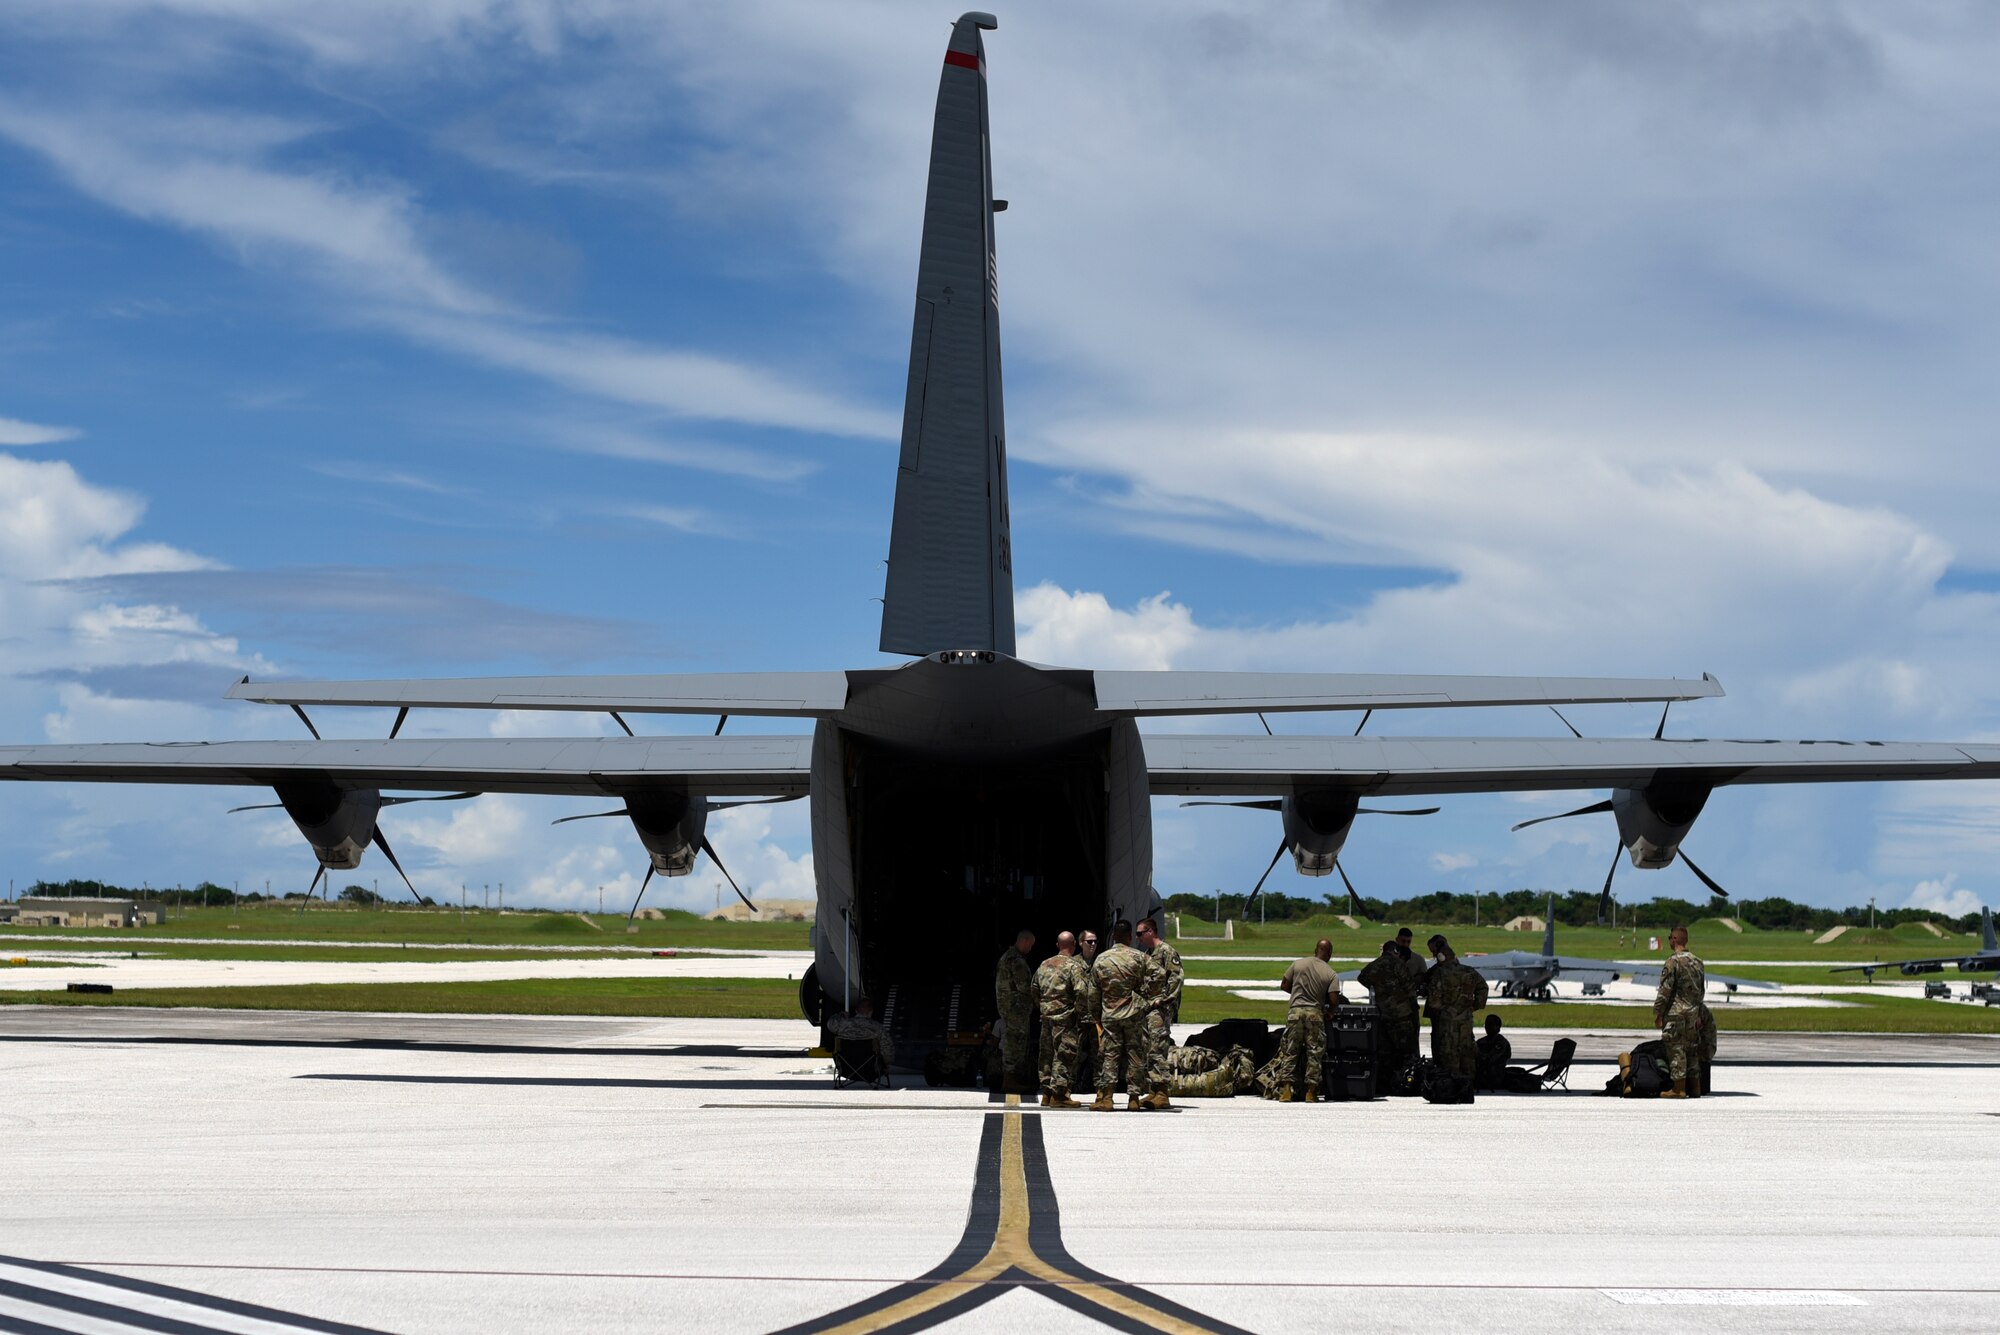 Airmen assigned to the 36th Contingency Response Group prepare to load a C-130J Super Hercules Oct. 05, 2018, at Andersen Air Force Base, Guam. United States Indo-Pacific Command is deploying as part of the broader U.S. Government effort to support Indonesia's request for humanitarian assistance.  This effort includes coordination with the U.S. Department of State and U.S. Agency for International Development, in constant consultation with Indonesian authorities. (U.S. Air Force photo by Senior Airman Gerald R. Willis)